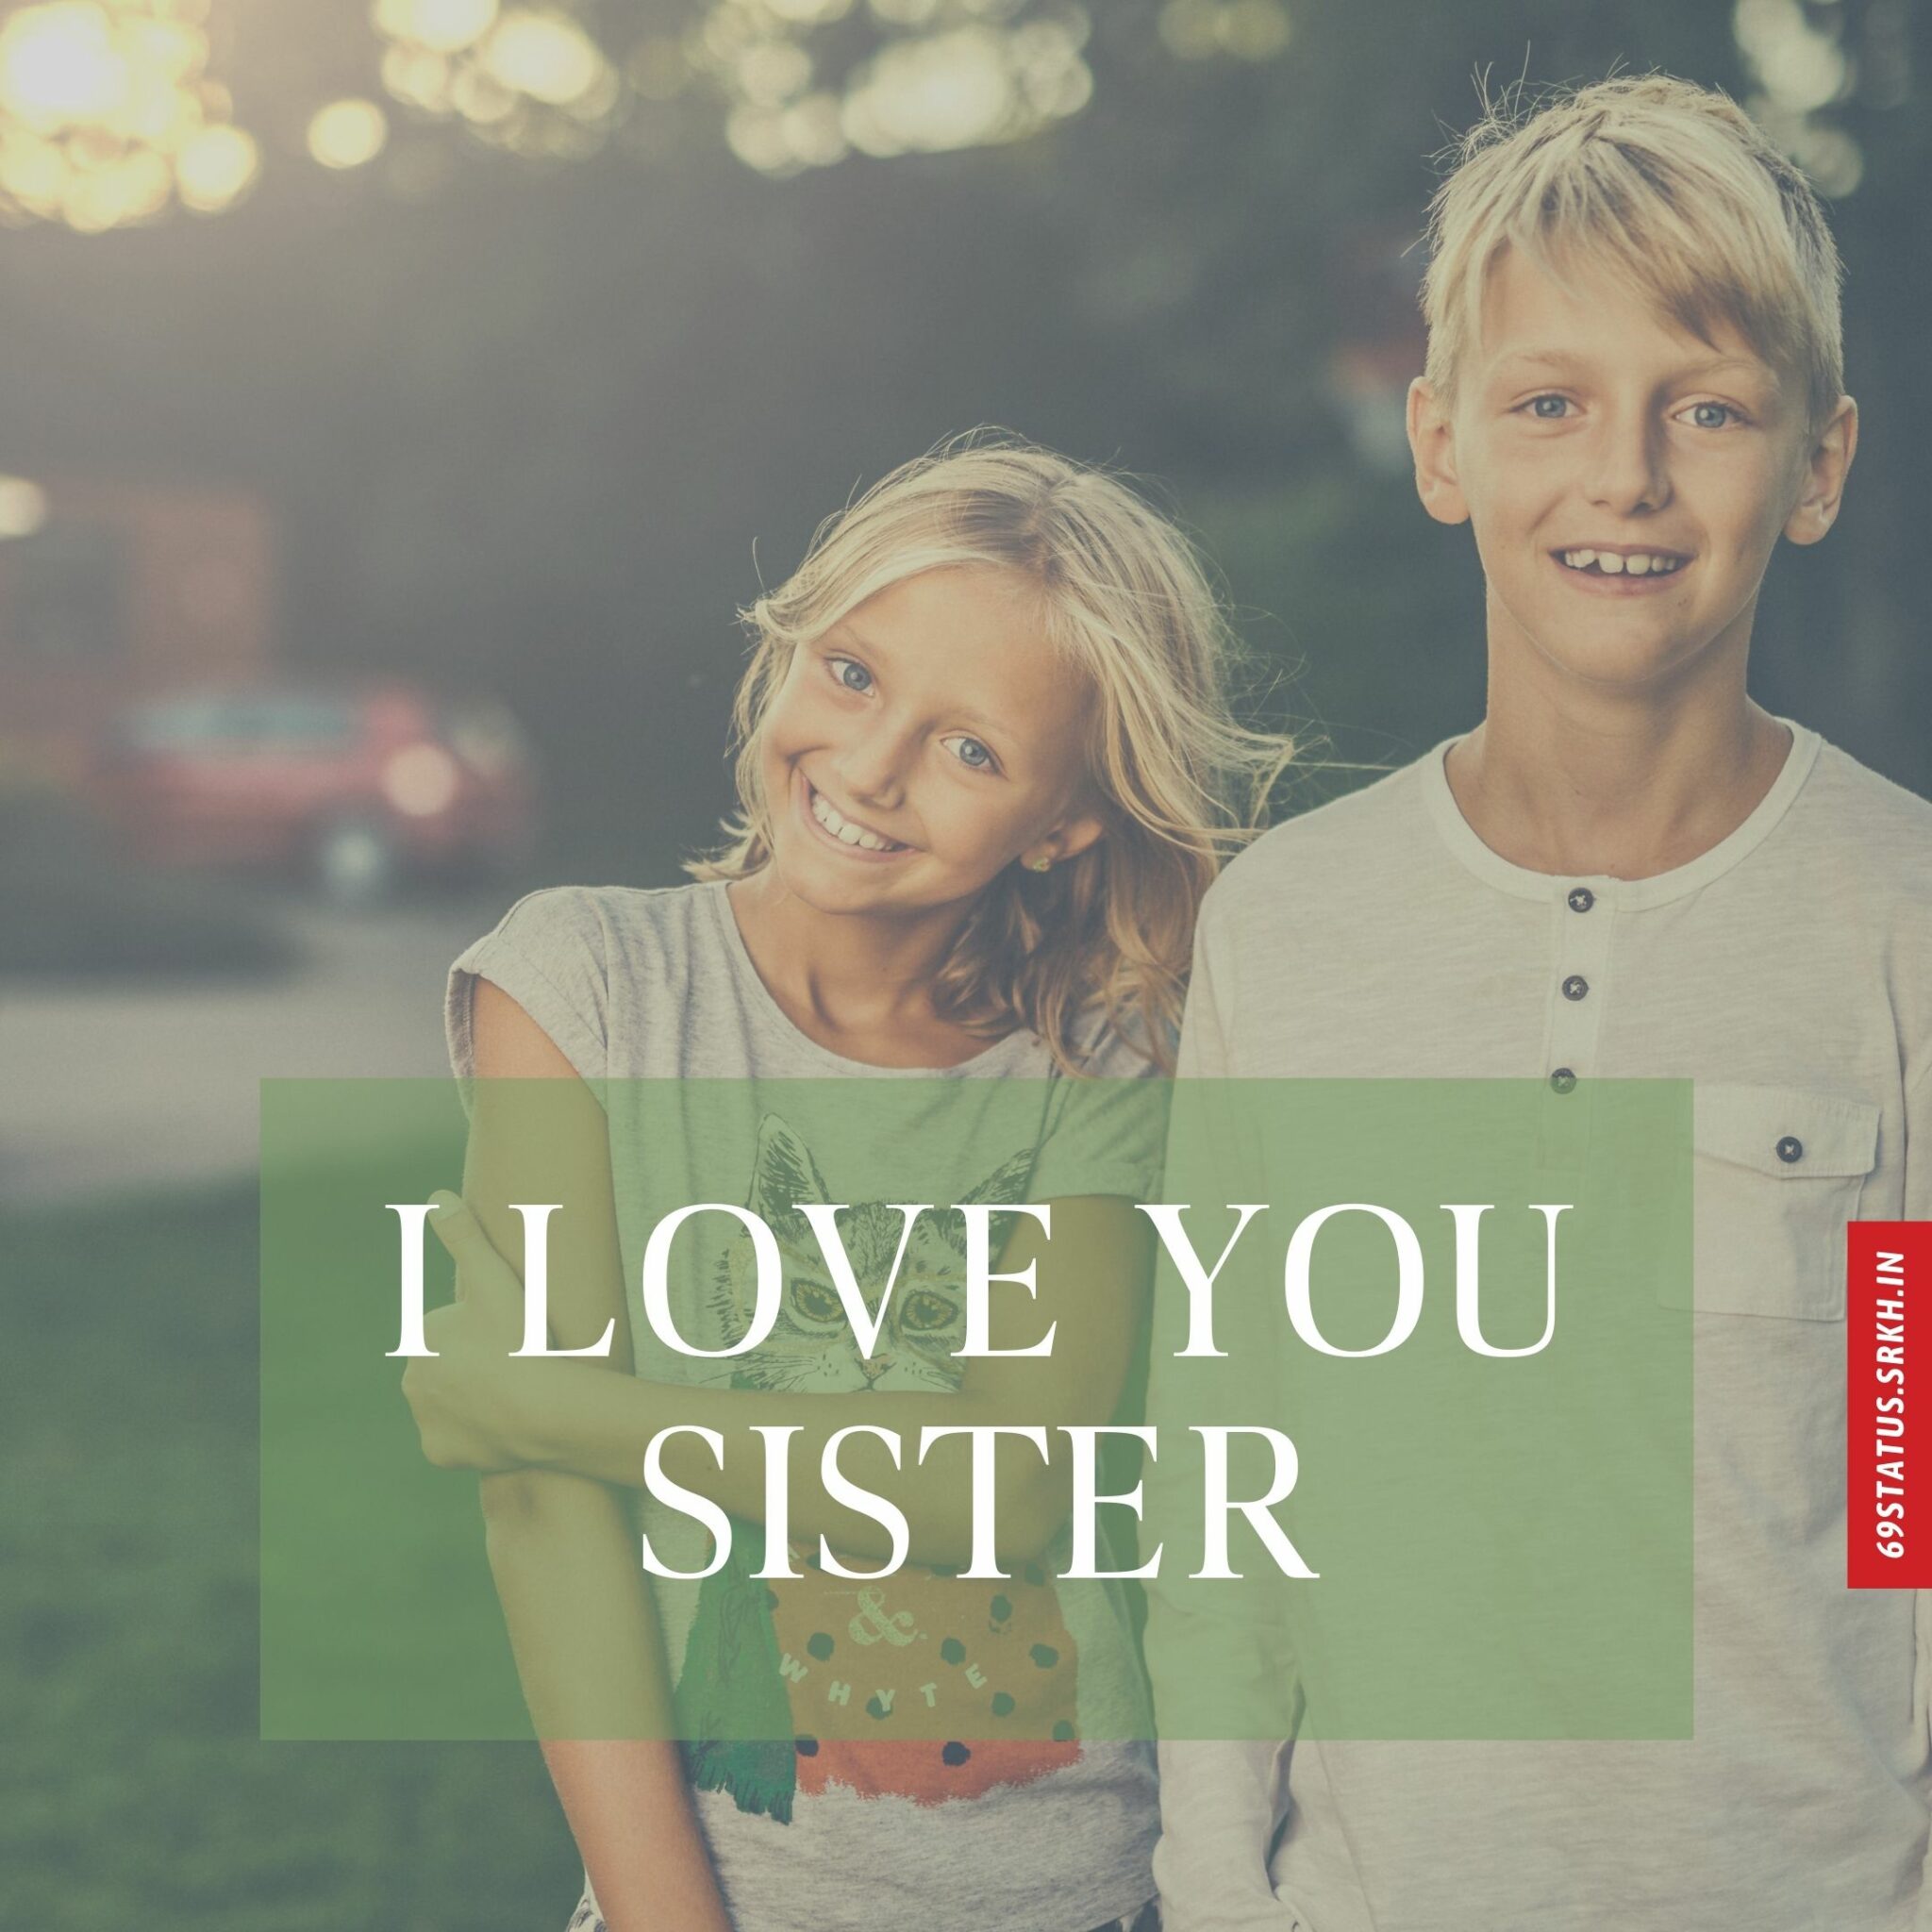 I Love You sister images